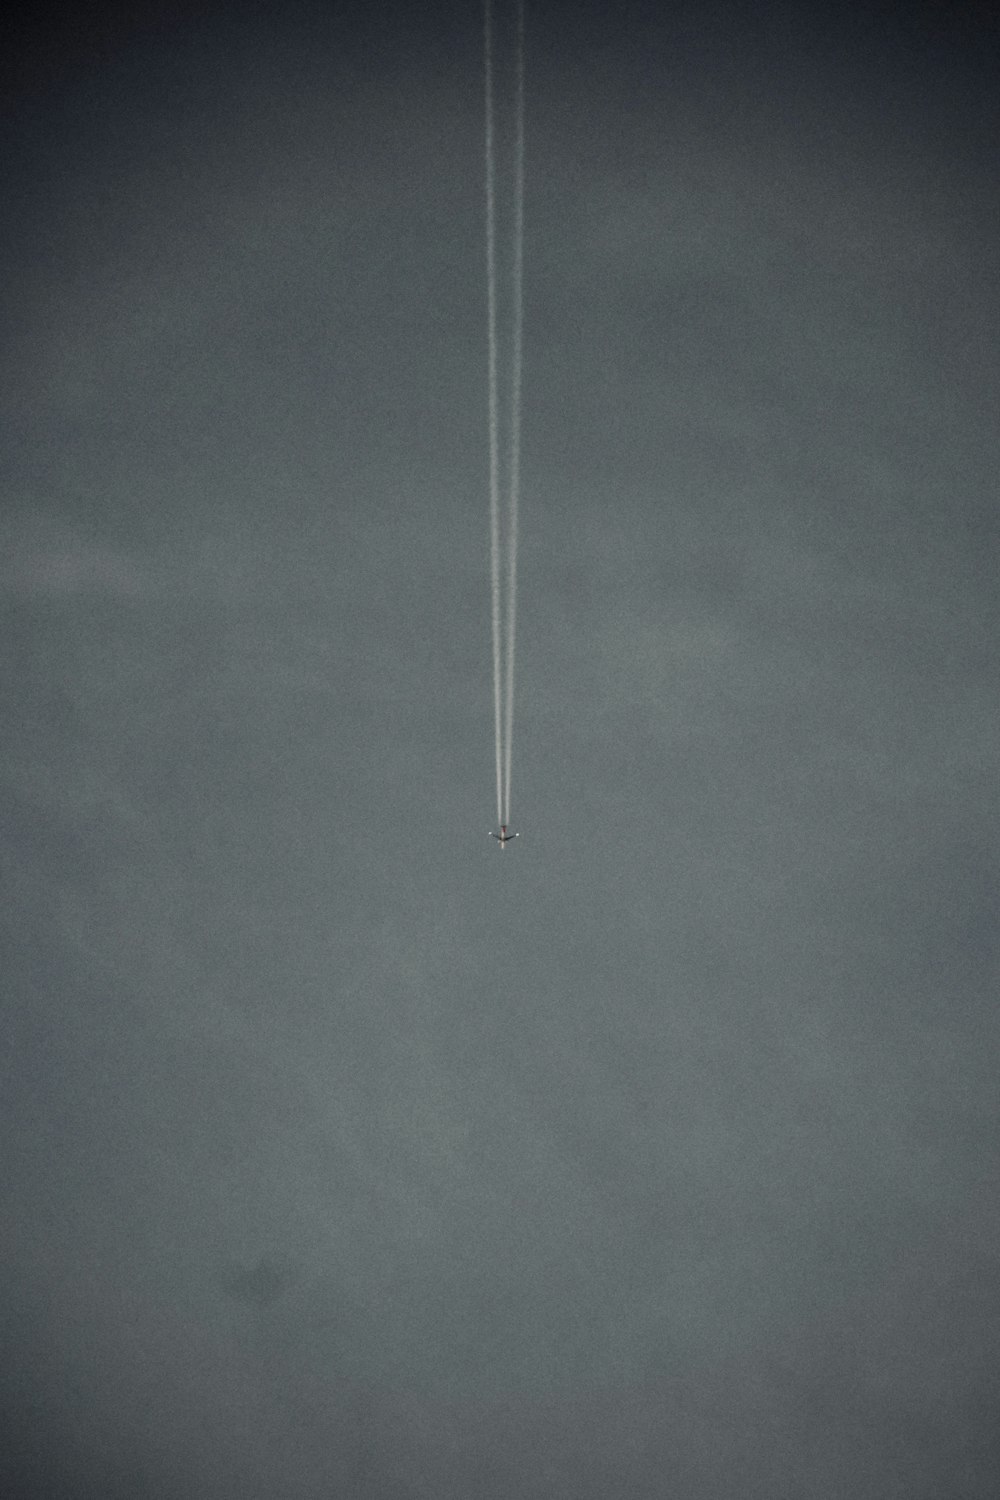 an airplane is flying in the sky with a contrail